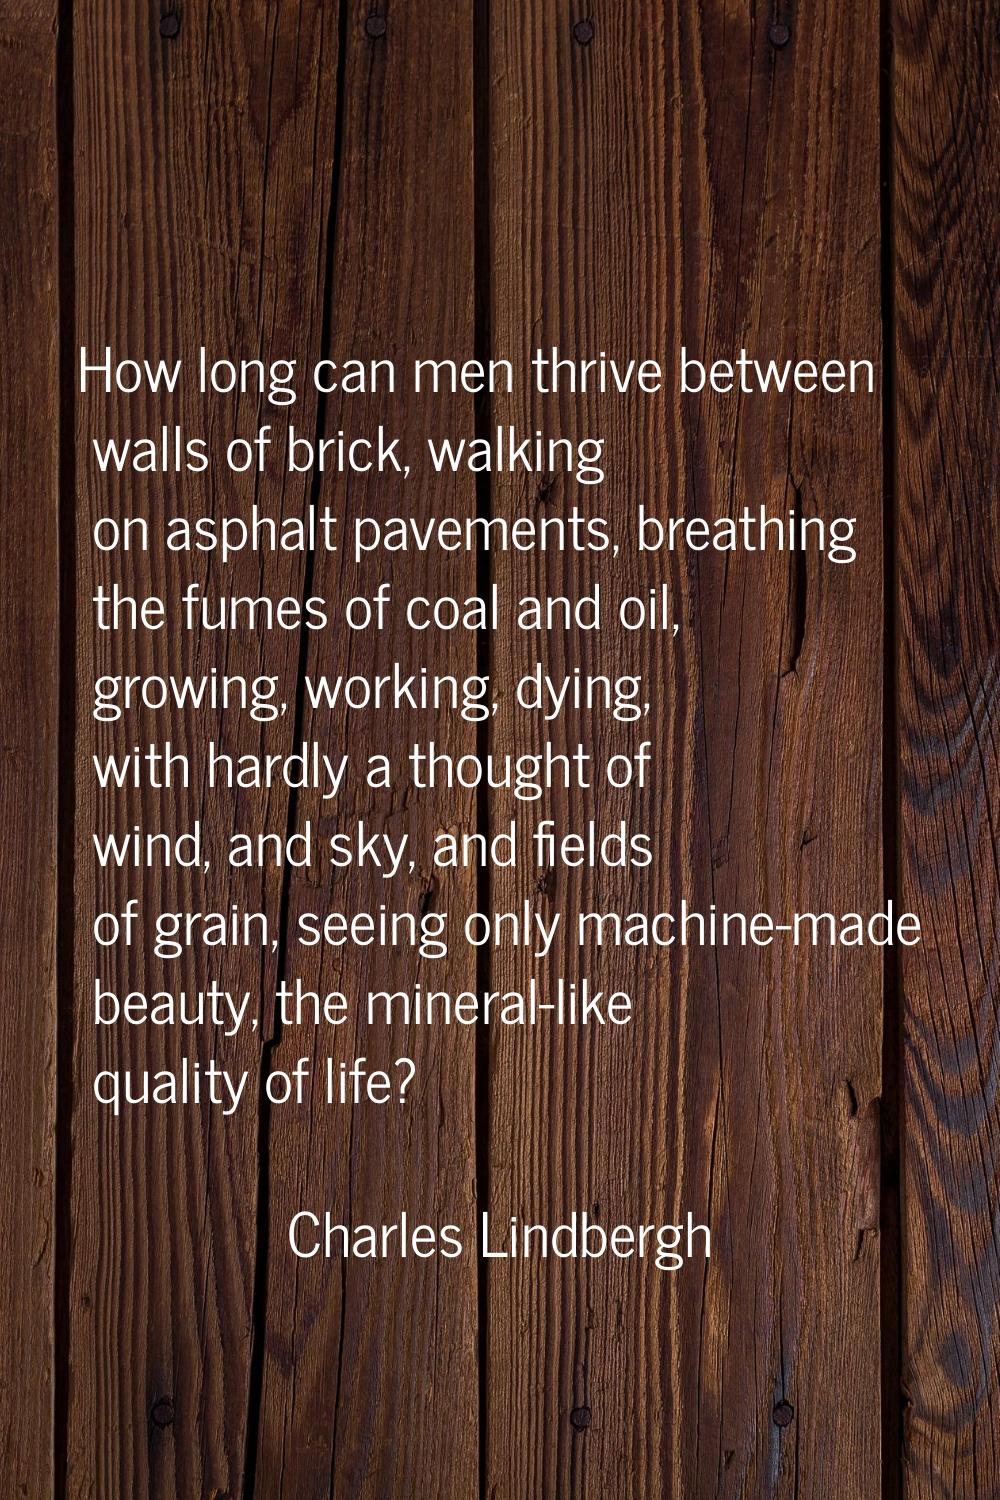 How long can men thrive between walls of brick, walking on asphalt pavements, breathing the fumes o